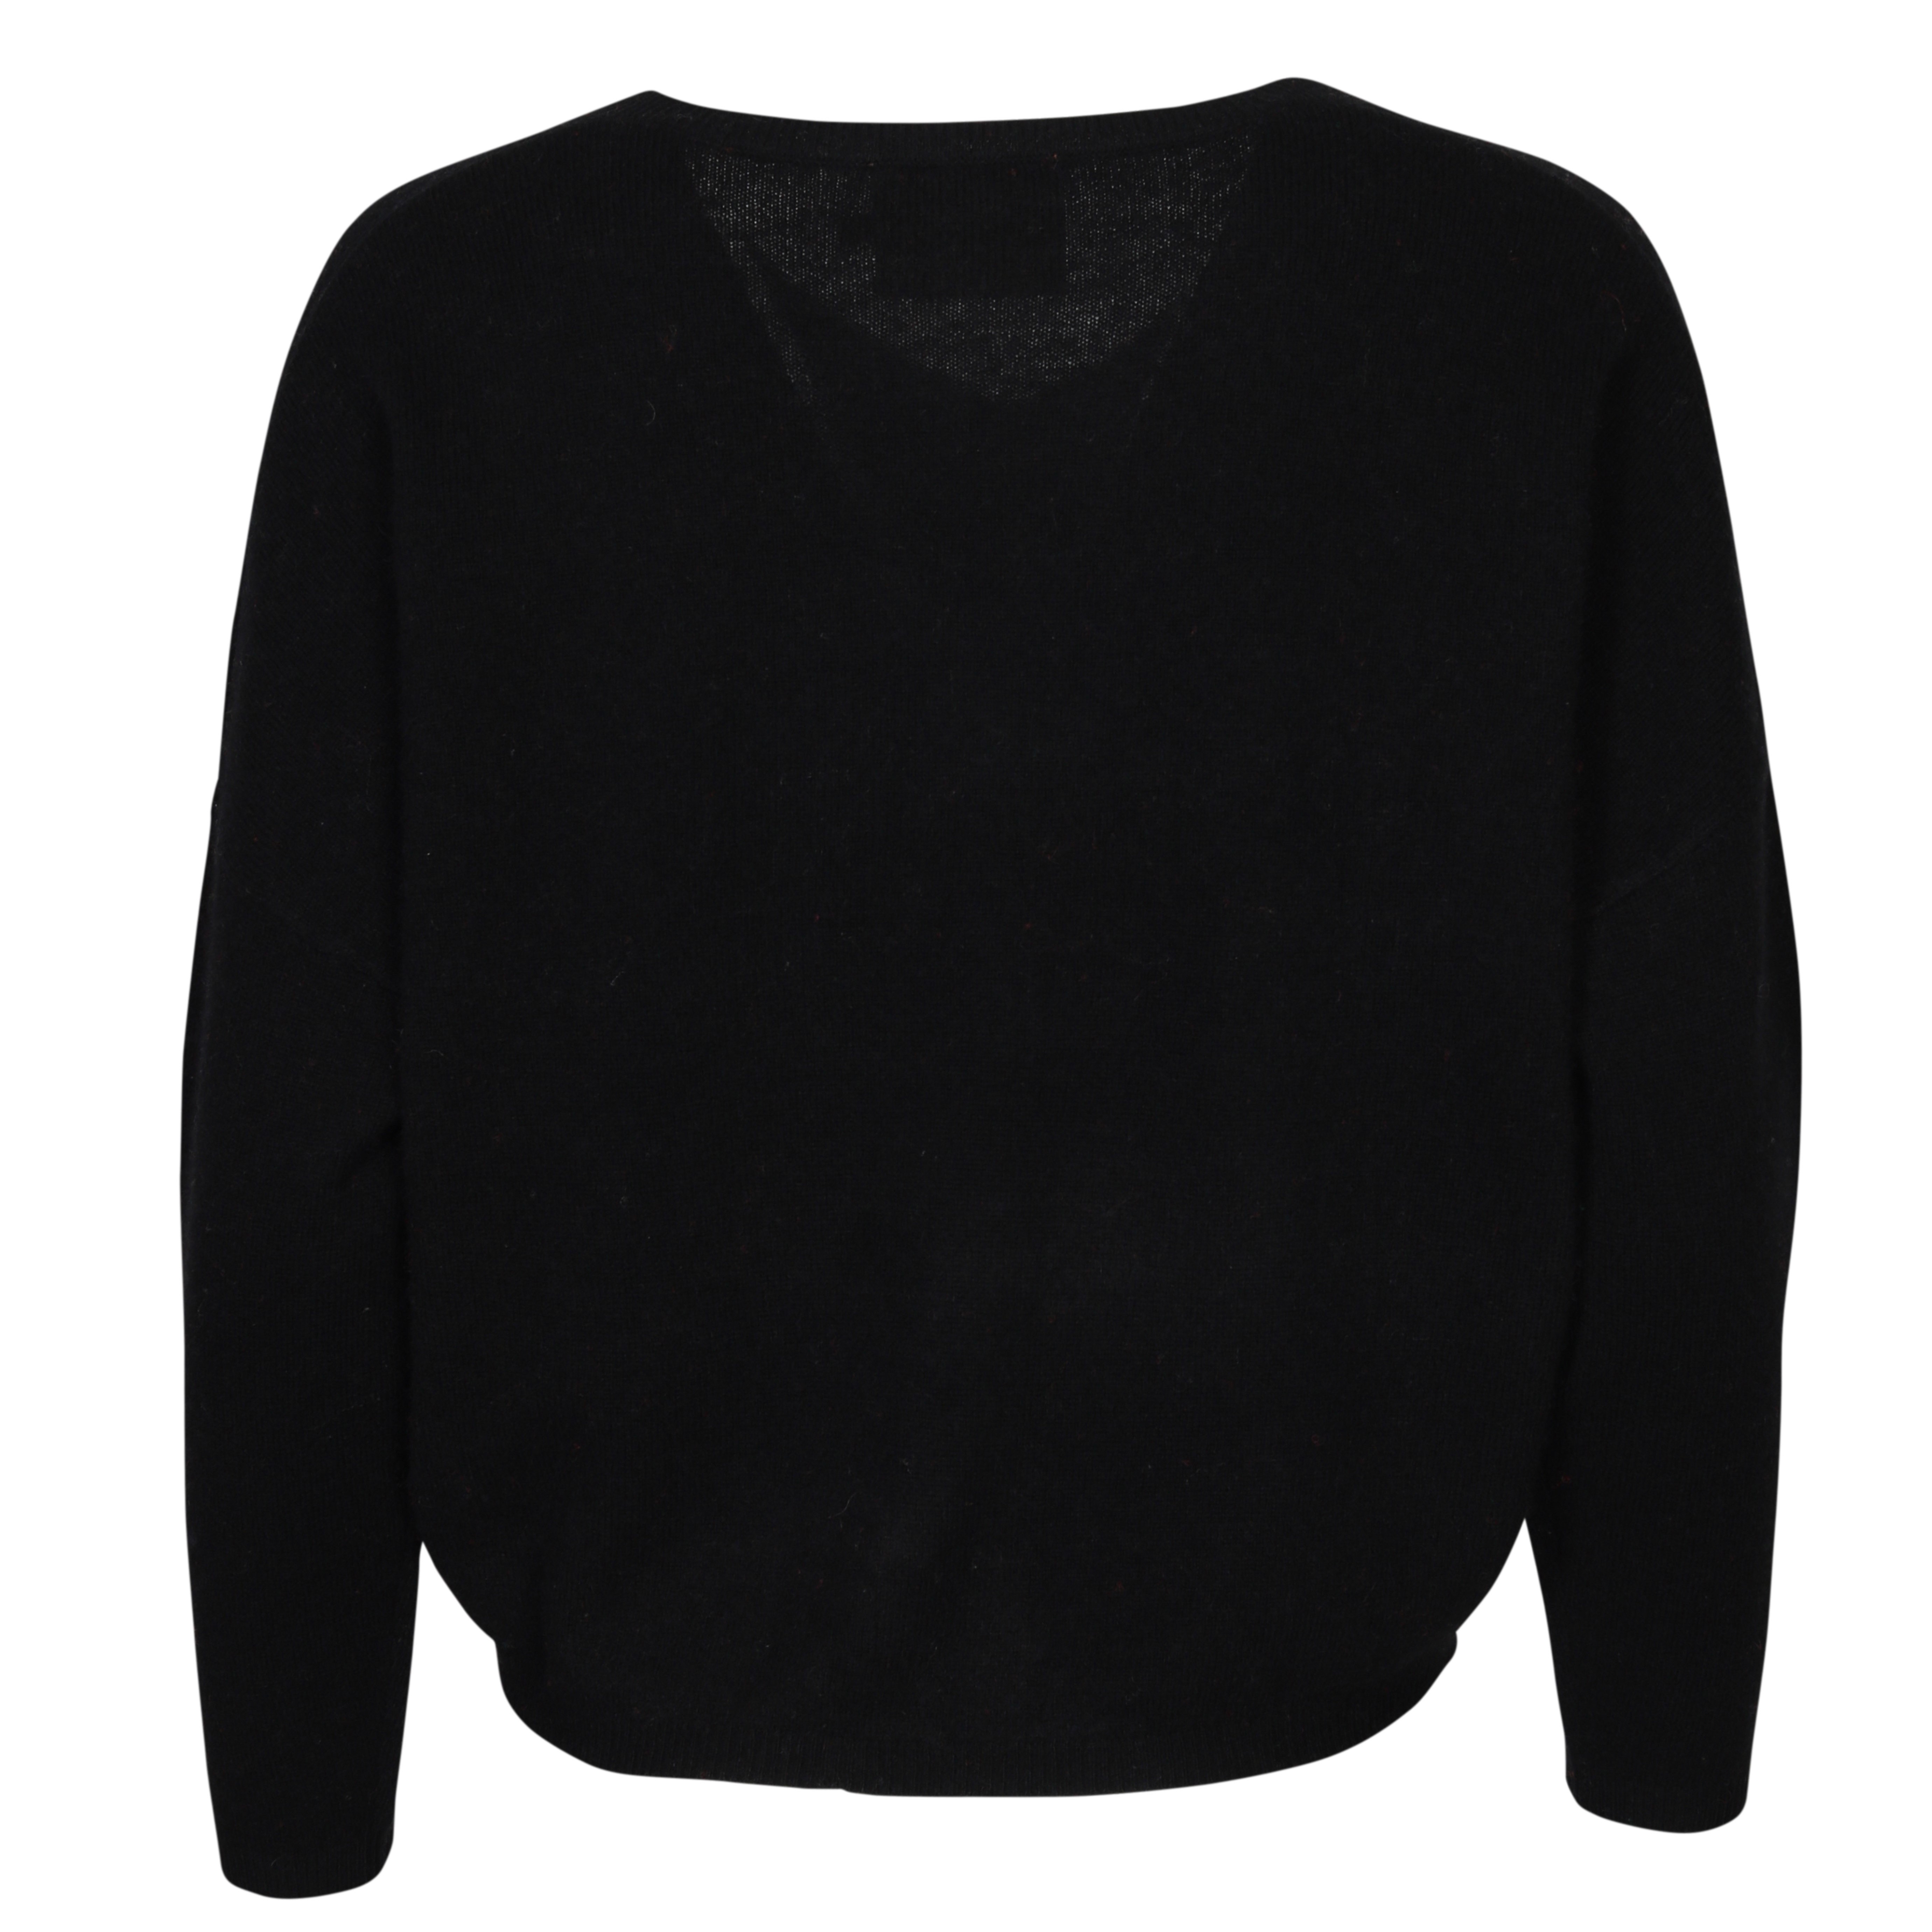 Absolut Cashmere Alicia Pullover in Noir XS